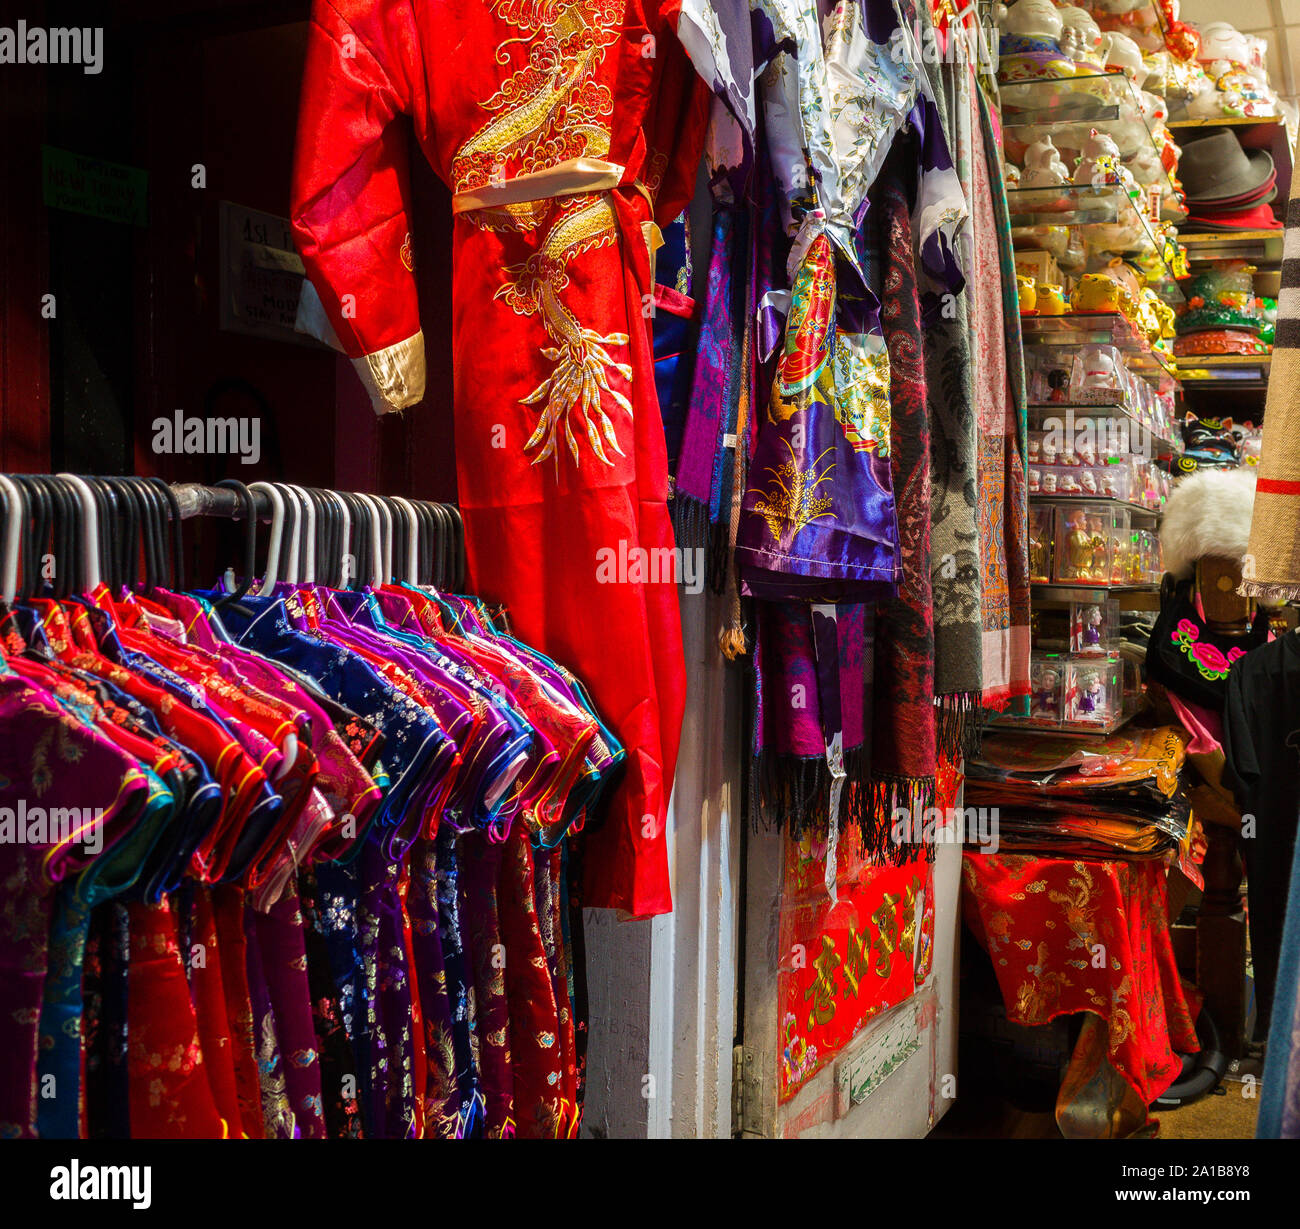 An oriental shop selling clothing, fabric and various ornaments. Stock Photo